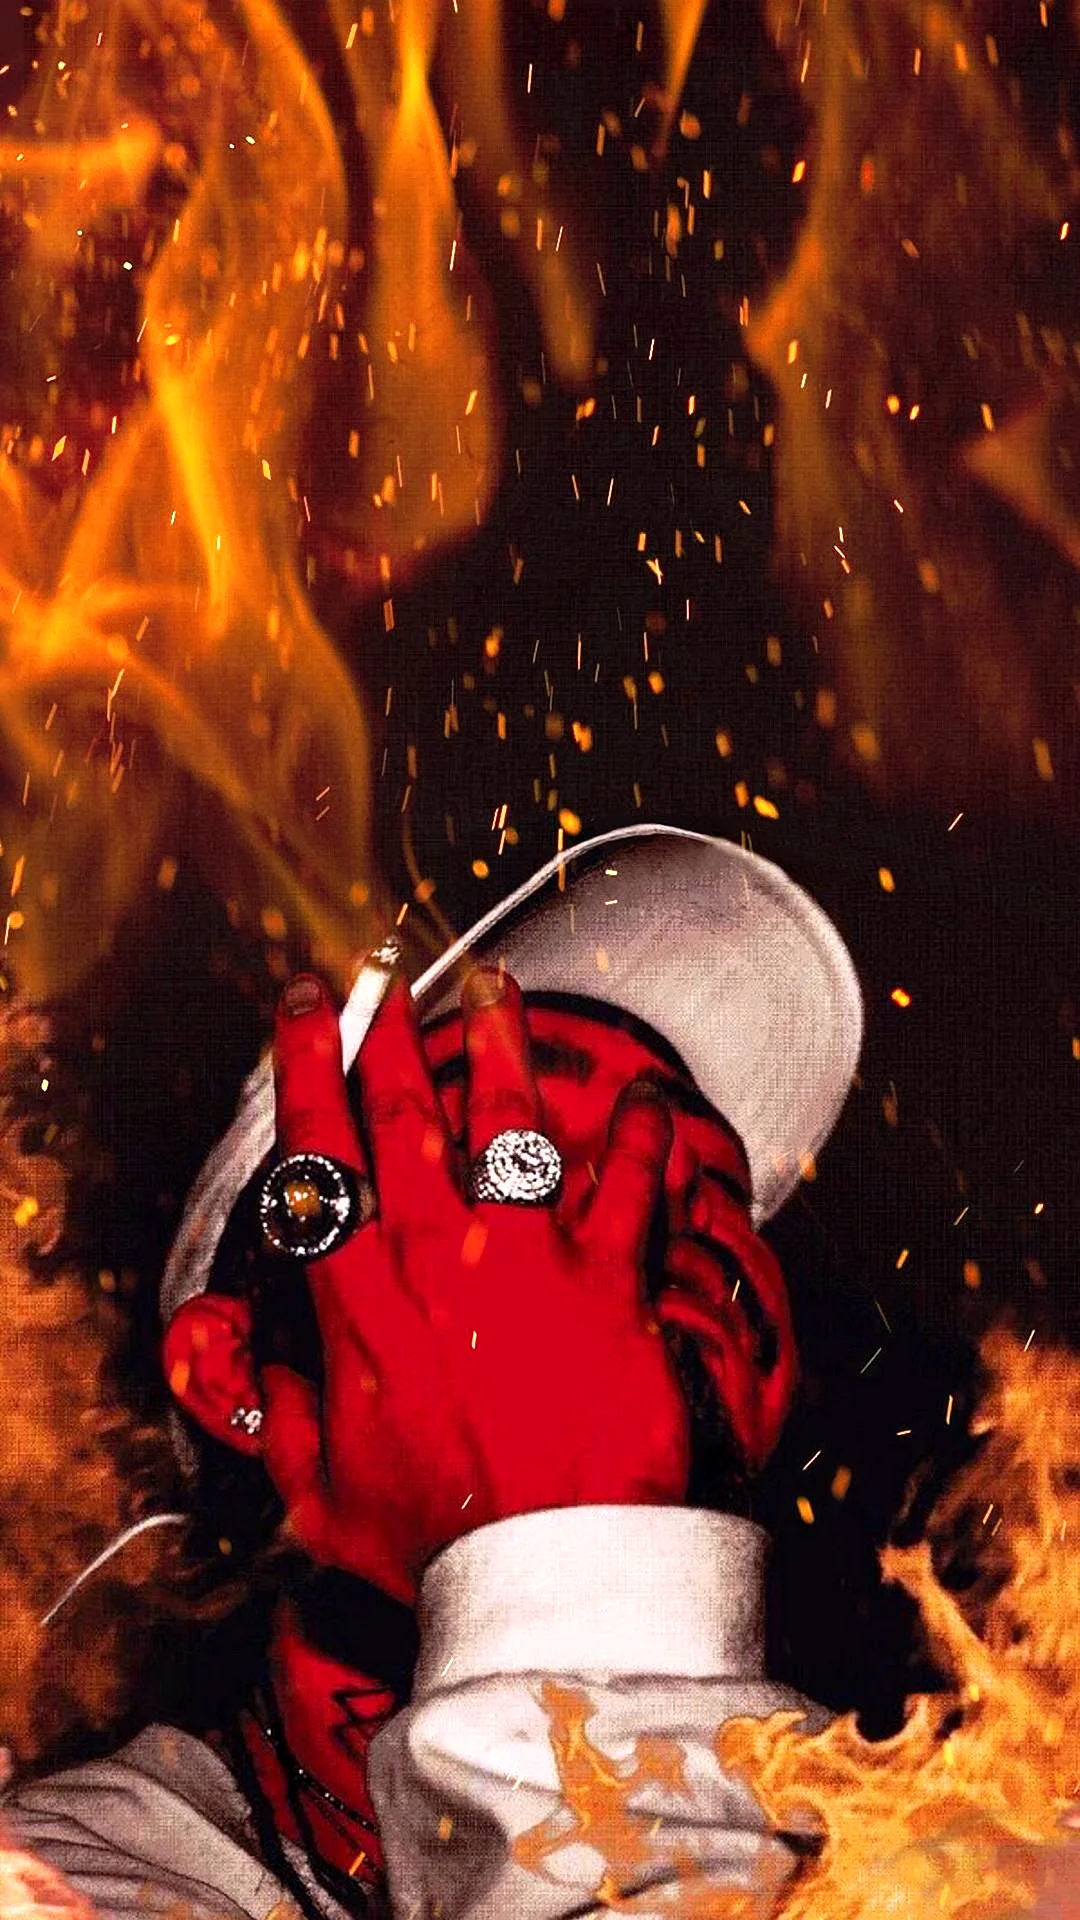 Post Malone 4K Wallpaper For iPhone